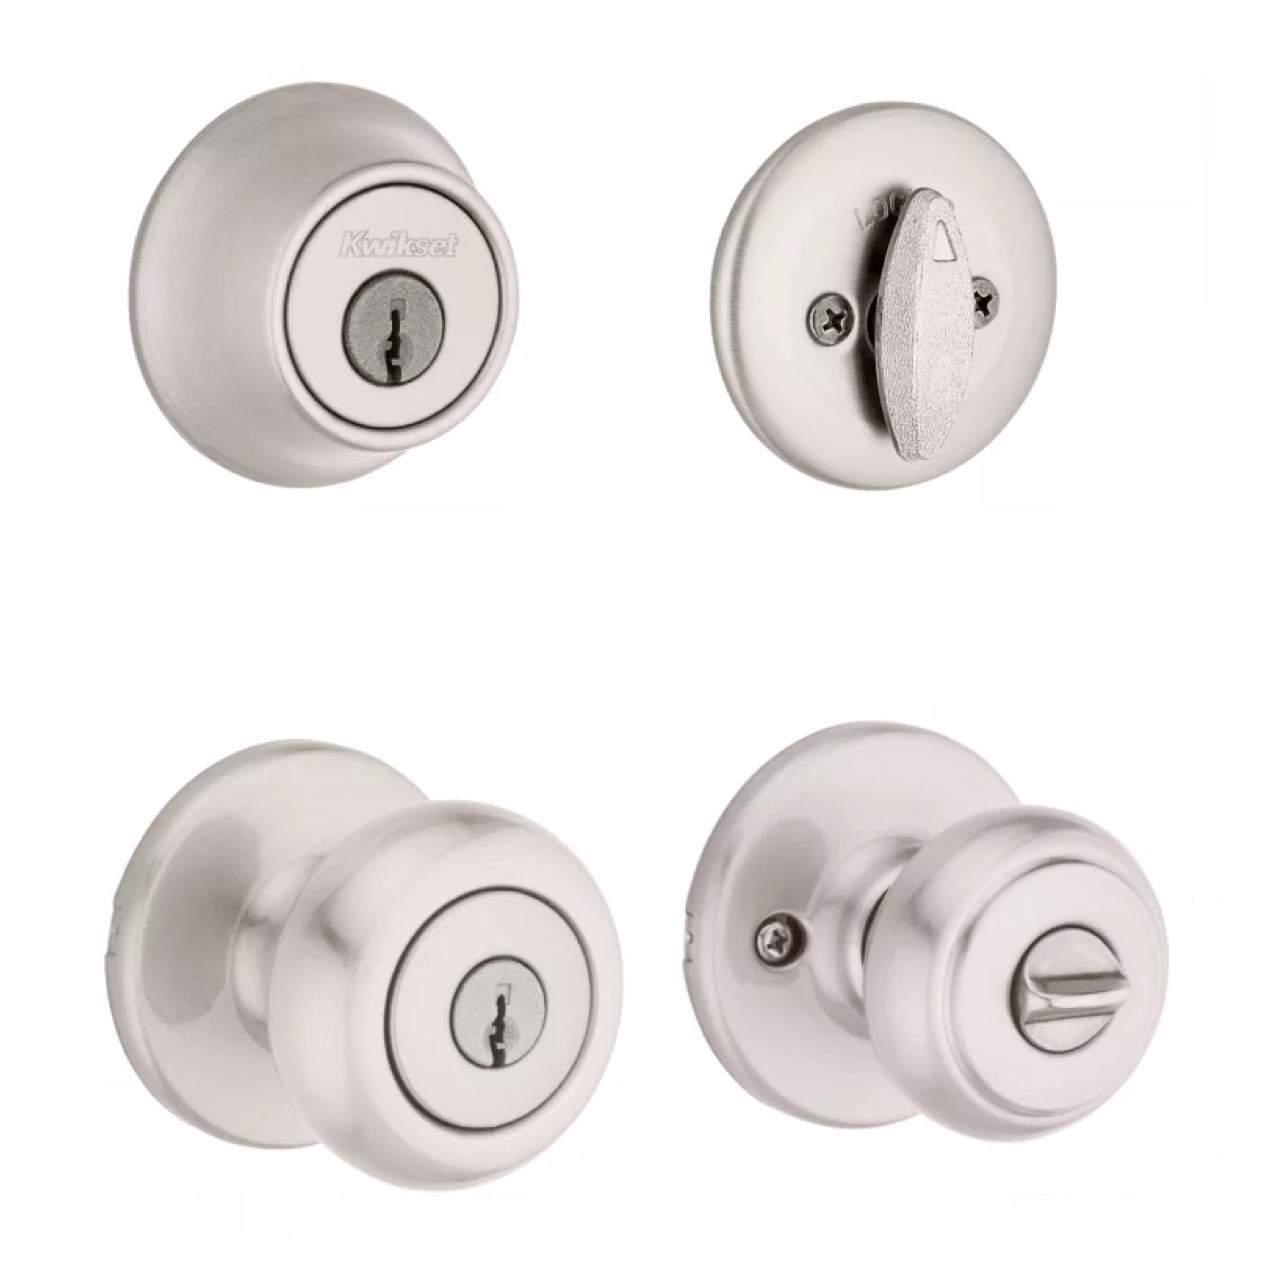 Kwikset 695 Tylo Entry Knob and Double Cylinder Deadbolt Combo Pack in Satin Chrome by Kwikset - 4